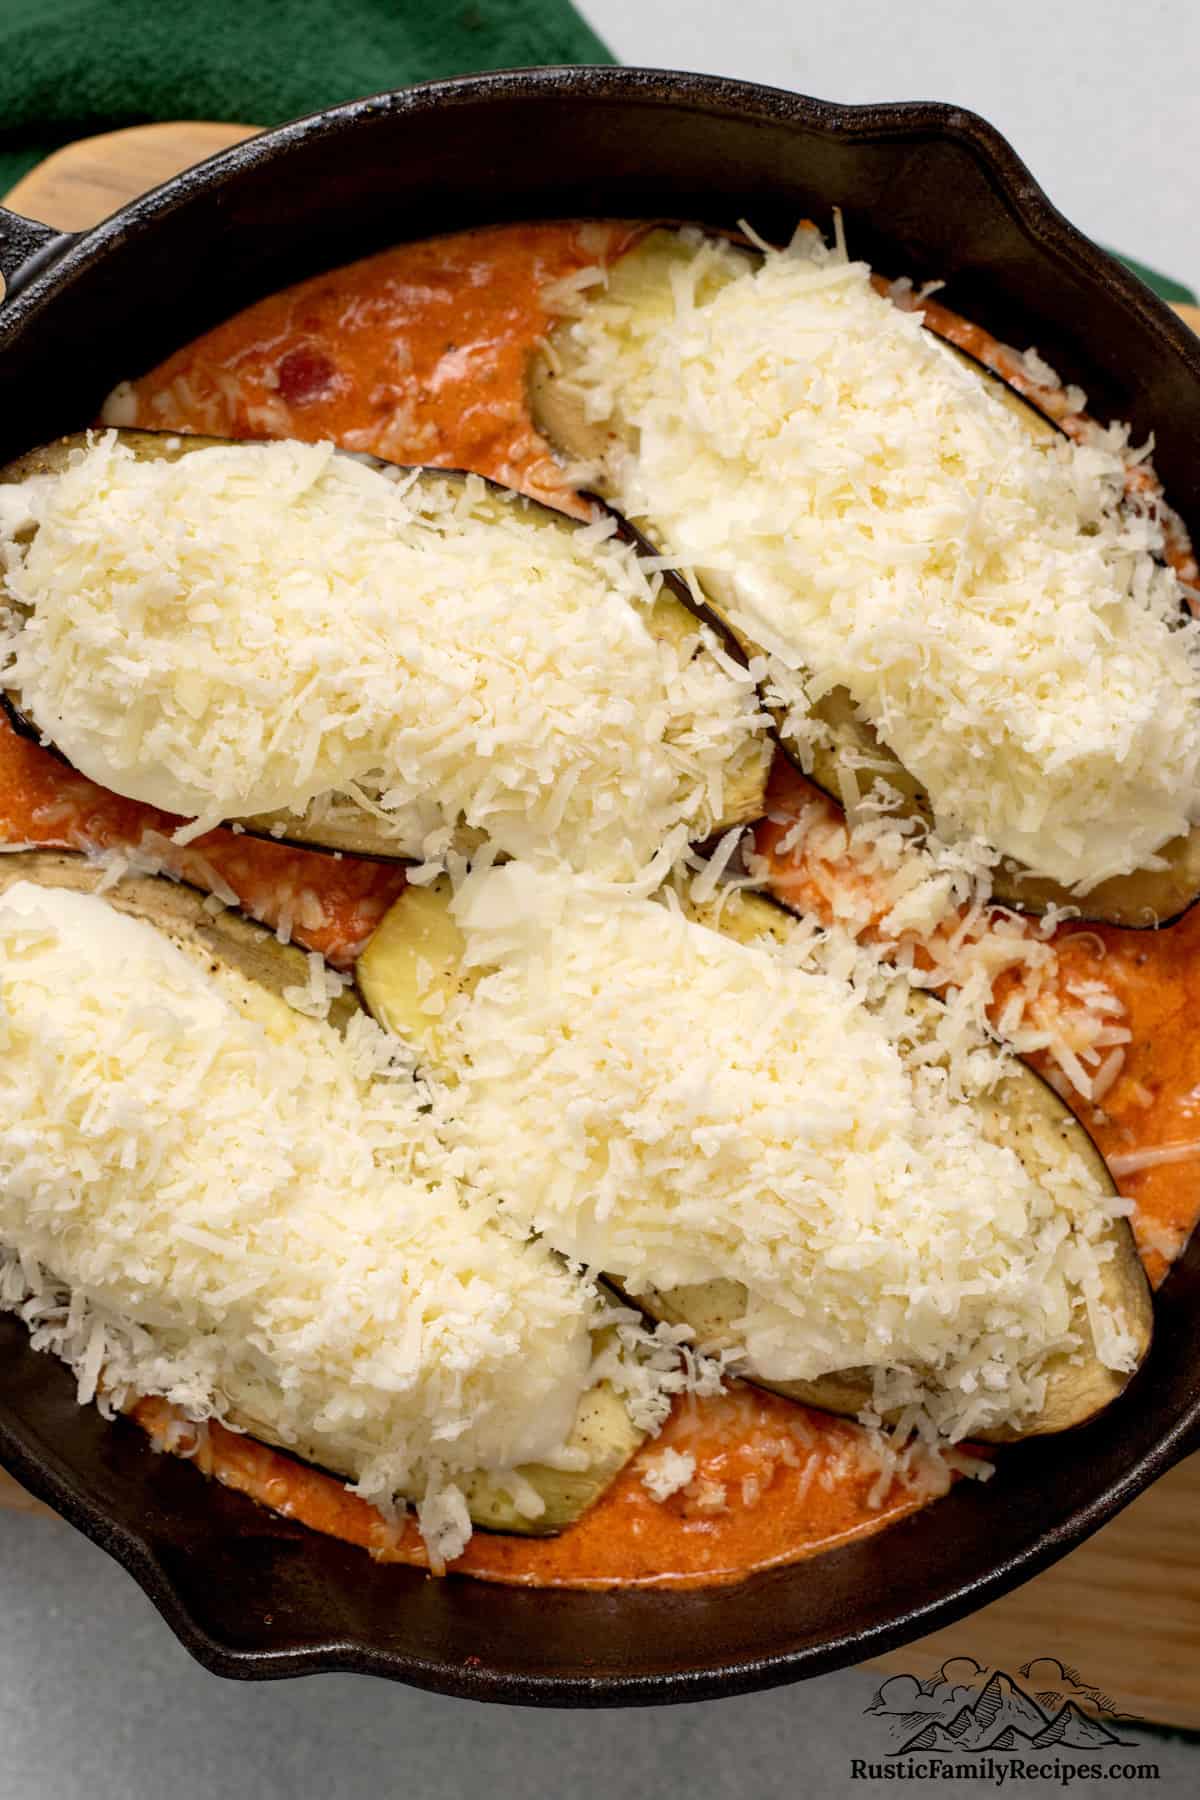 Chicken is topped with cheese to make Chicken Sorrentino.